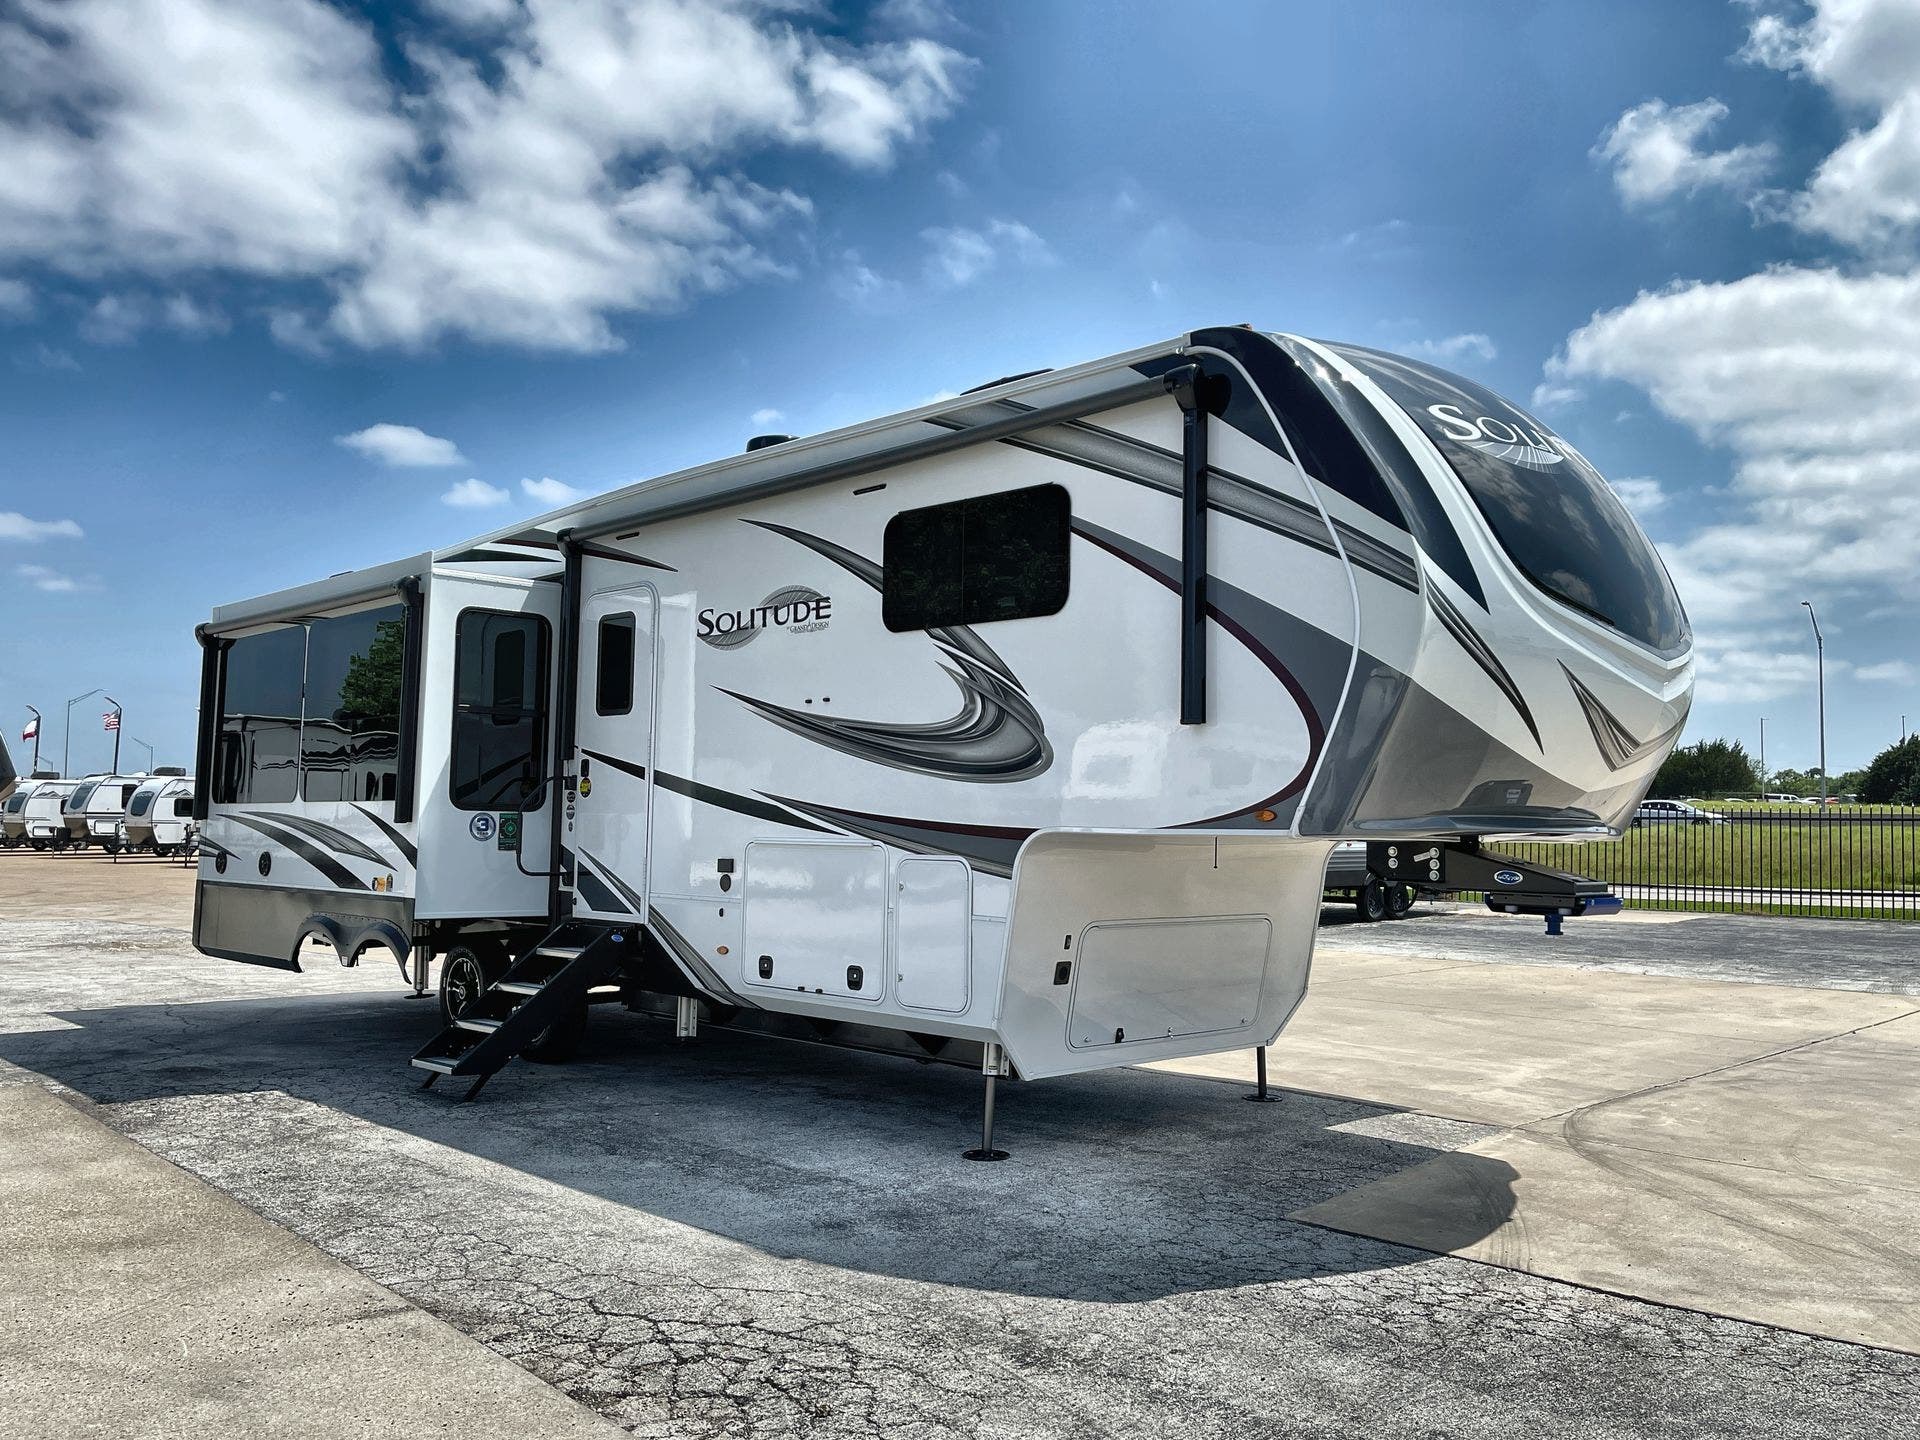 used travel trailers in houston texas